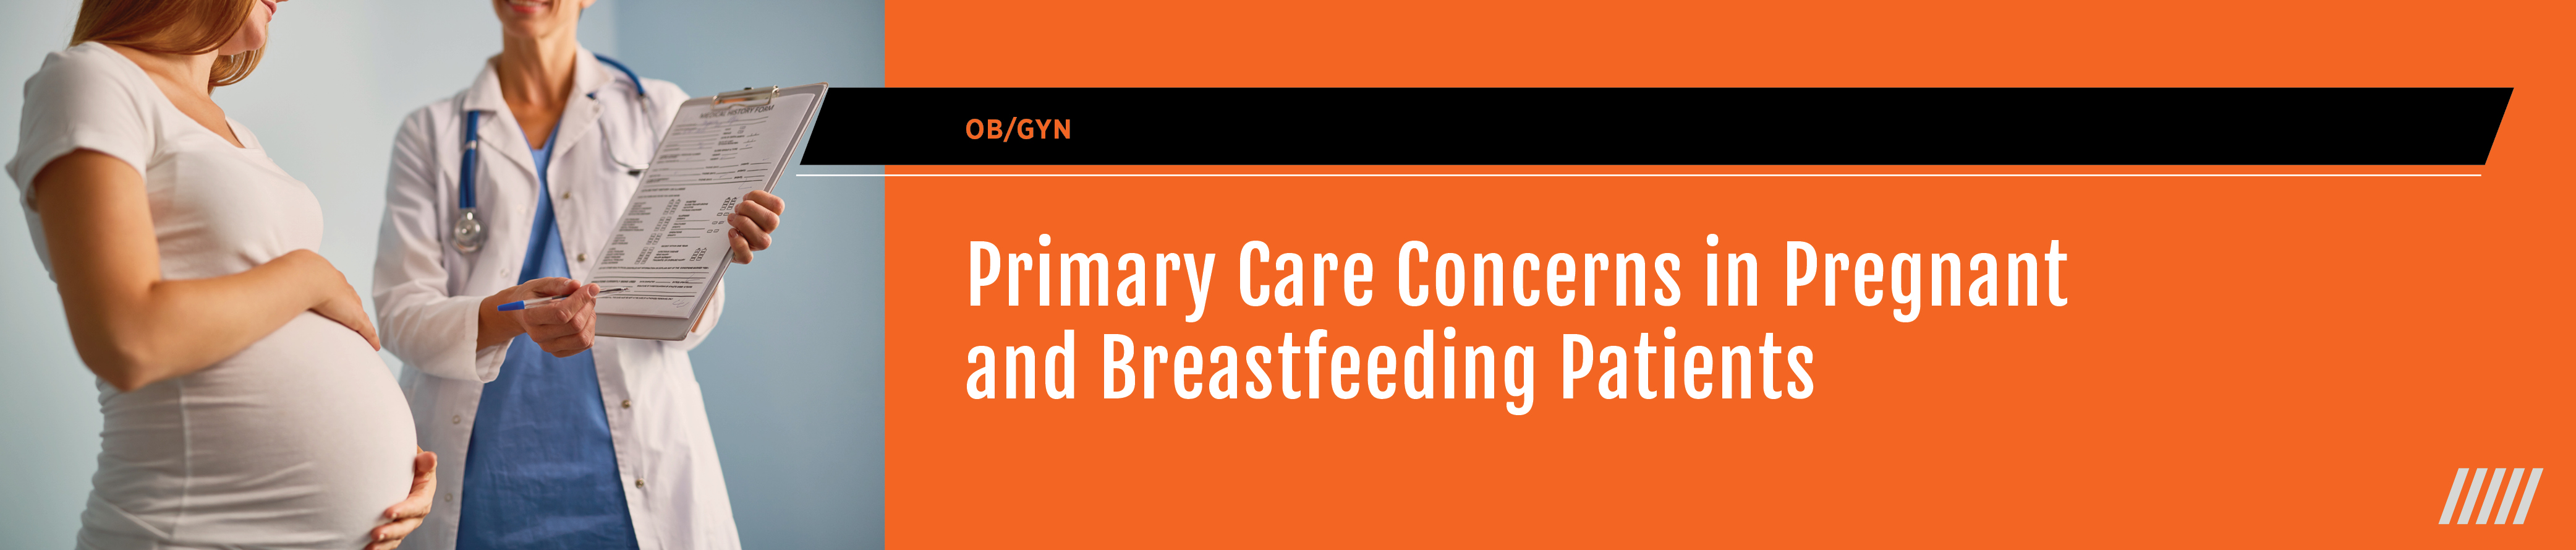 Primary Care Concerns in Pregnant and Breastfeeding Patients Banner